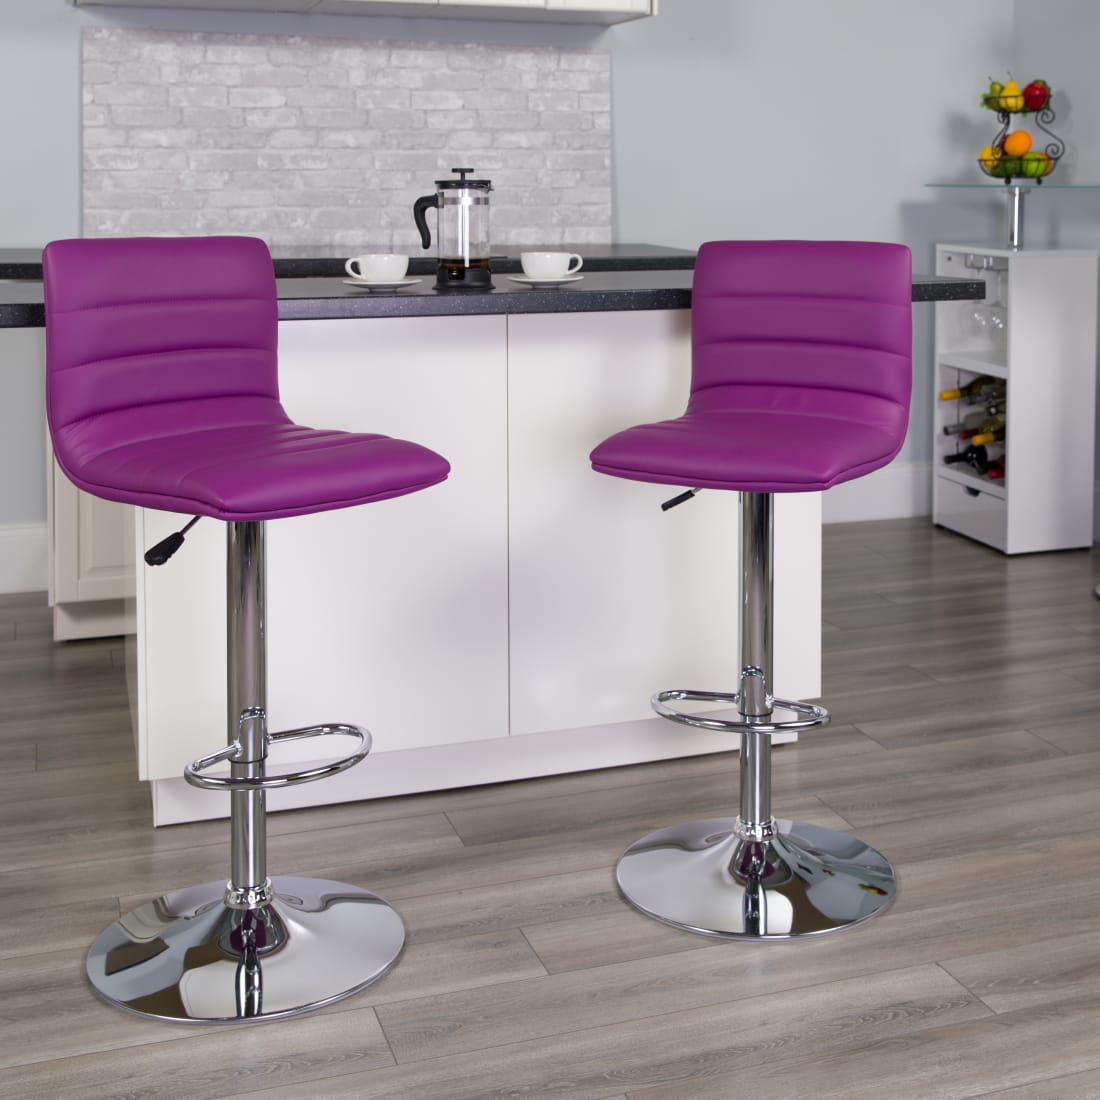 2 Pack Modern Purple Vinyl Adjustable Bar Stool with Back, Counter Height Swivel Stool with Chrome Pedestal Base